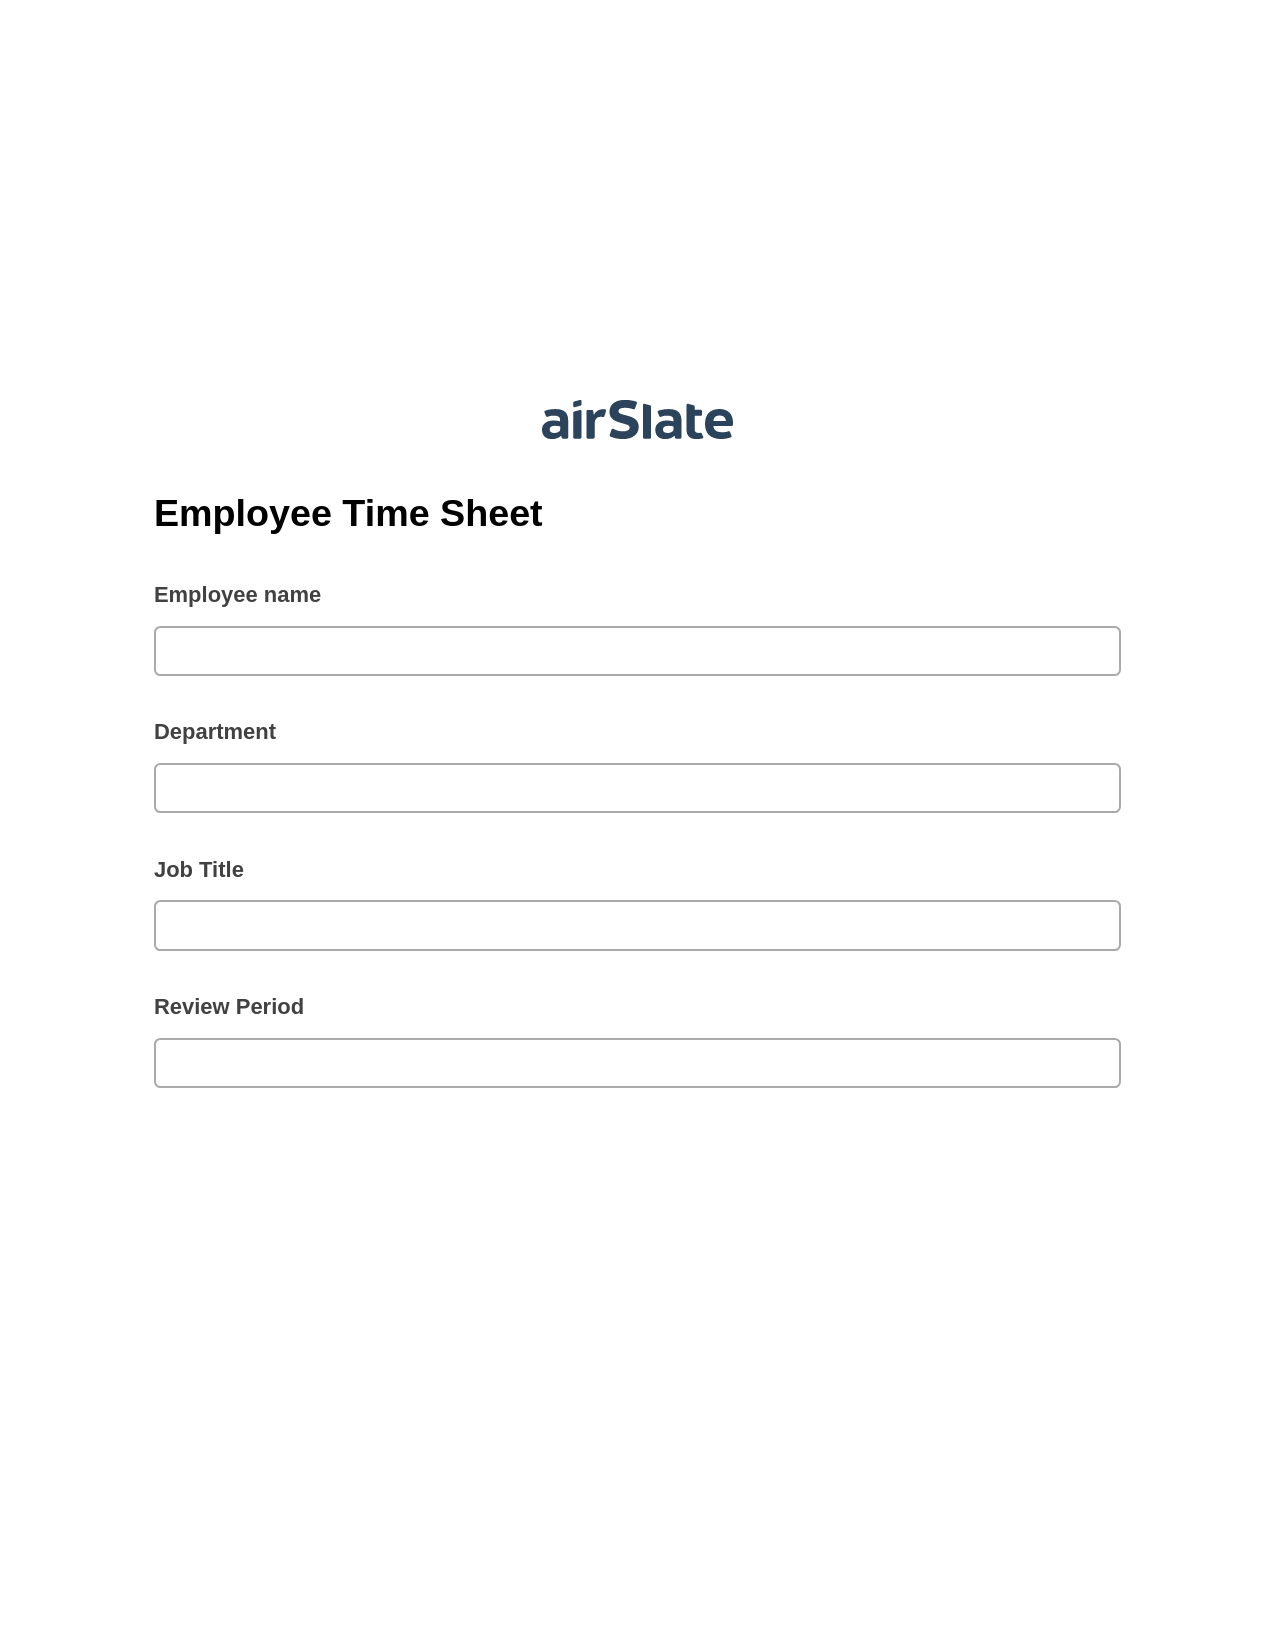 Employee Time Sheet Pre-fill from CSV File Bot, Send Mailchimp Campaign Bot, Archive to SharePoint Folder Bot